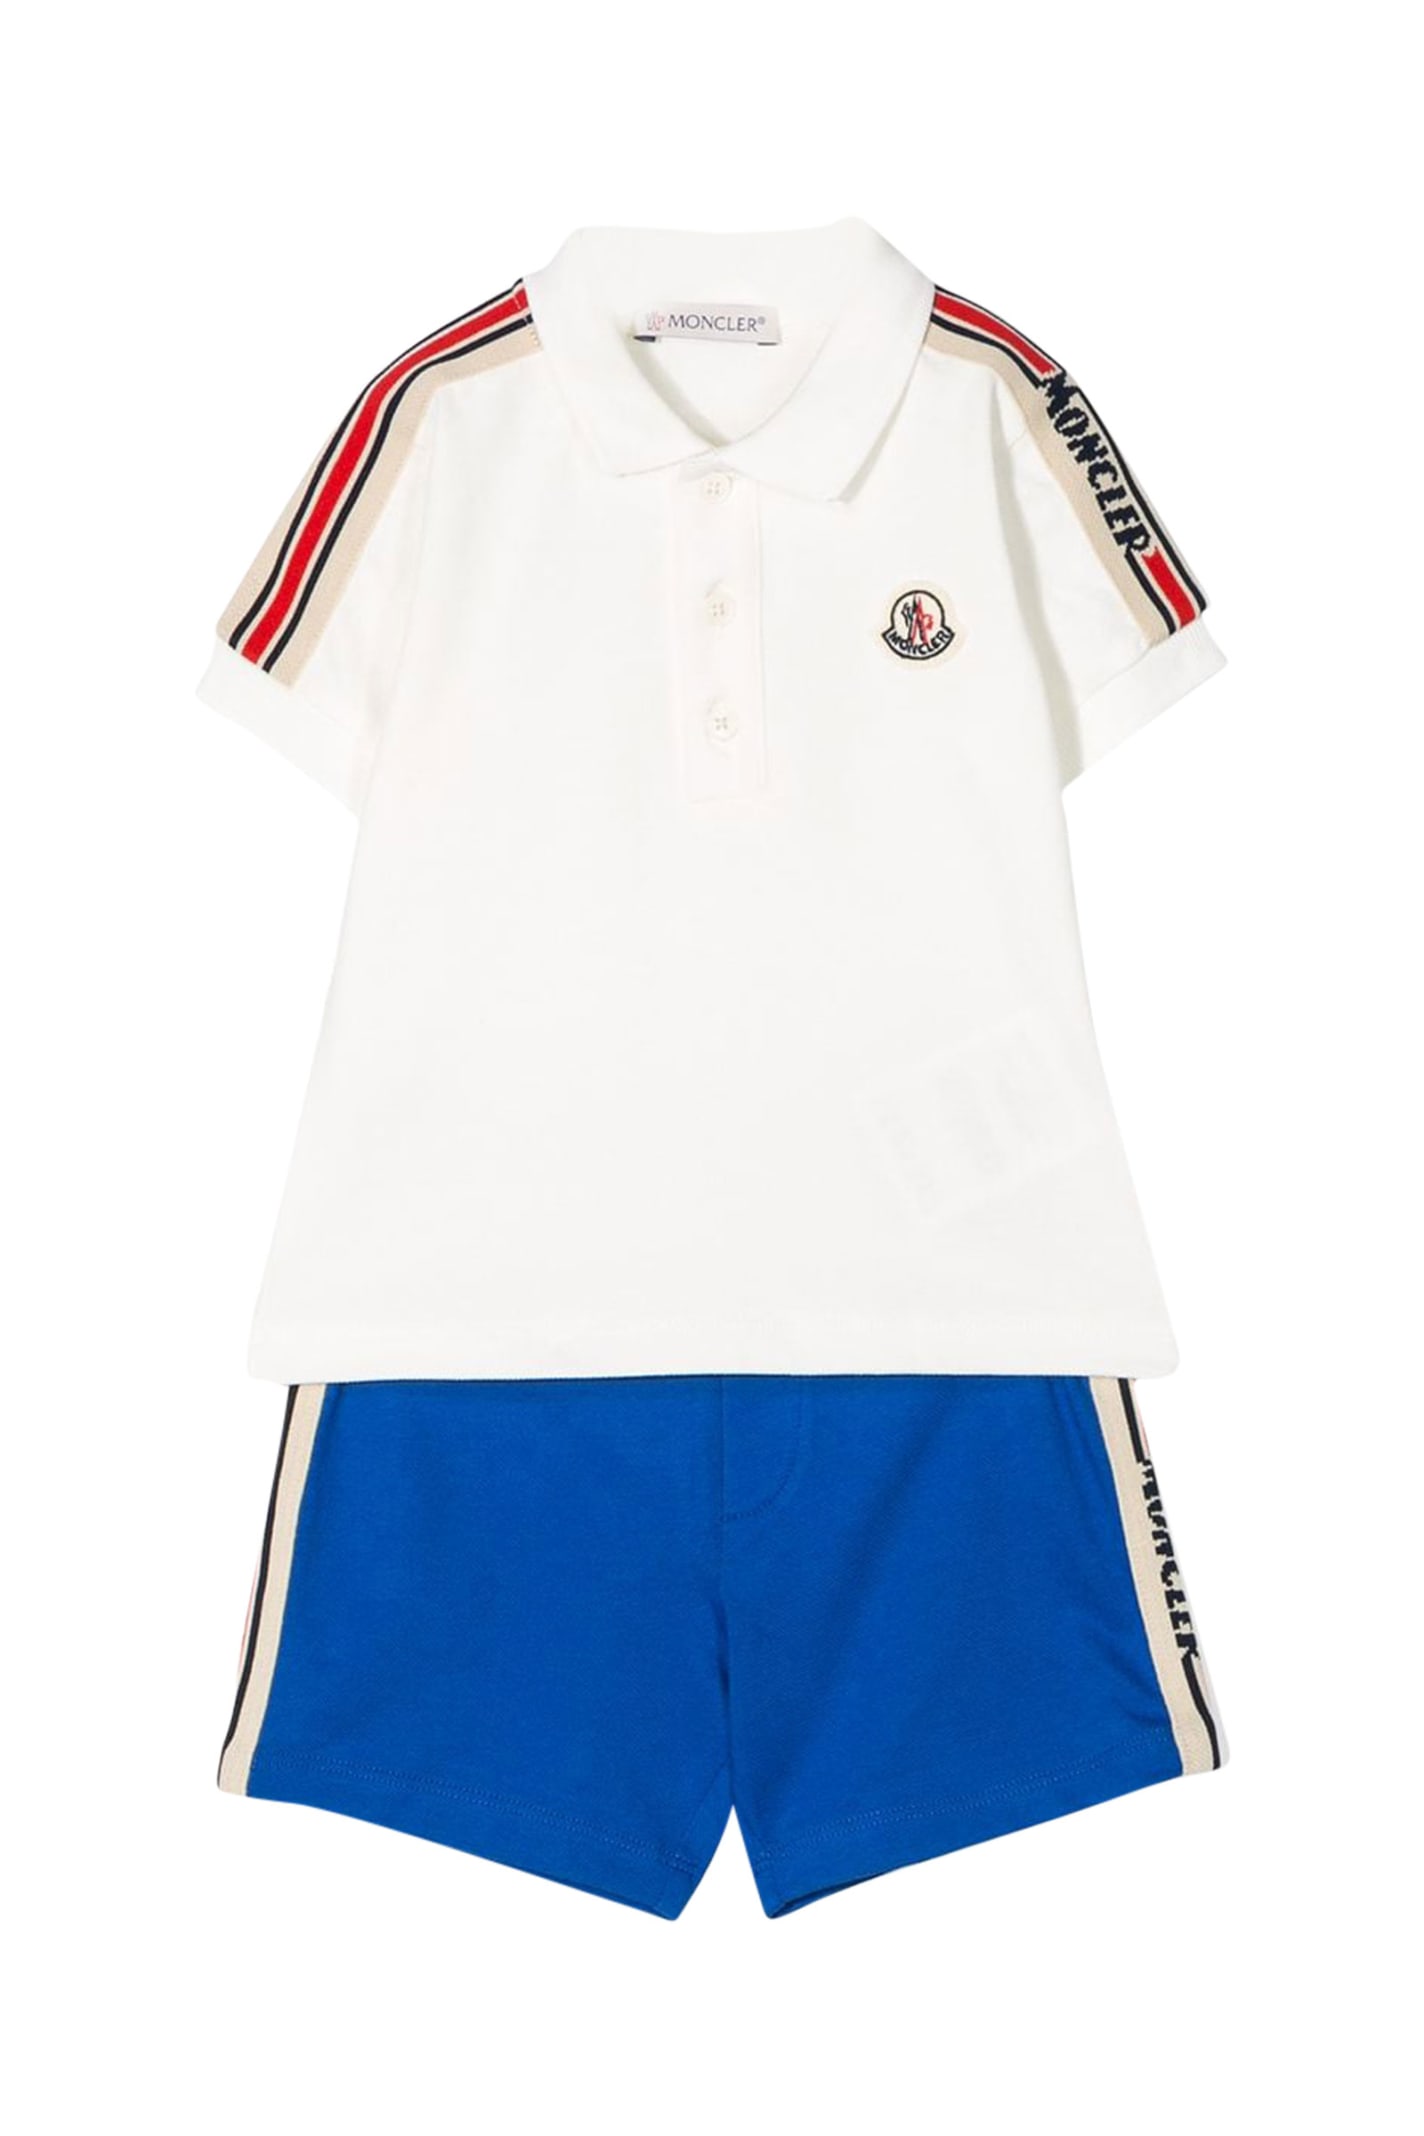 moncler shorts and top